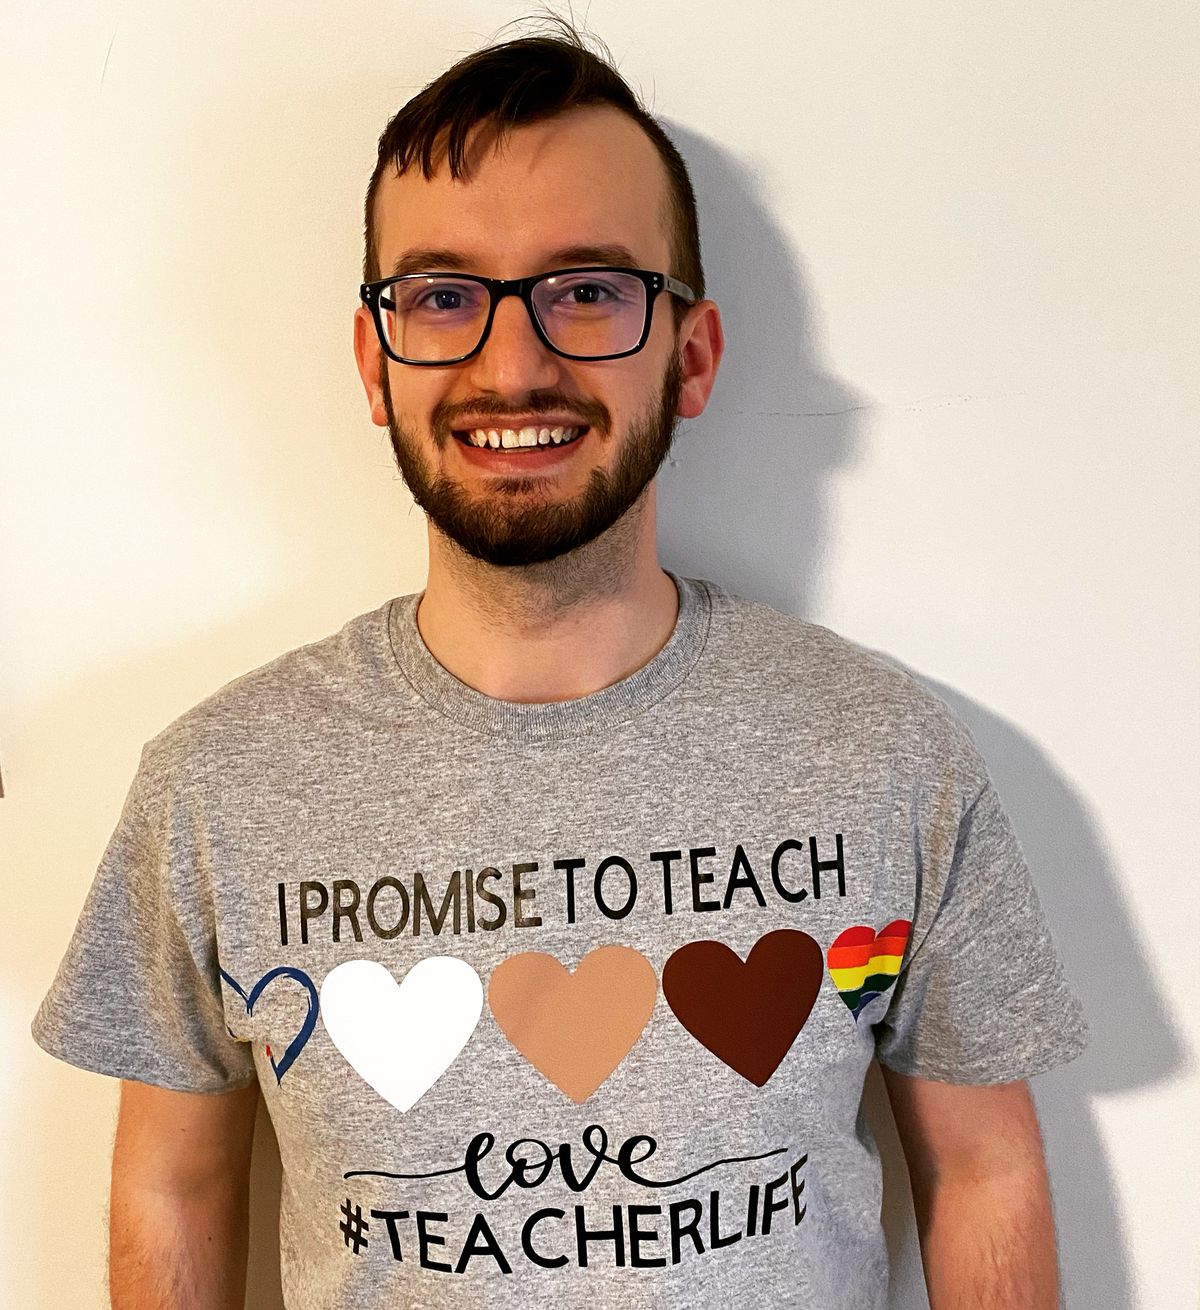 Man in gray shirt bearing hearts of different colors. Shirt says, “I promise to teach love #teacherlife”